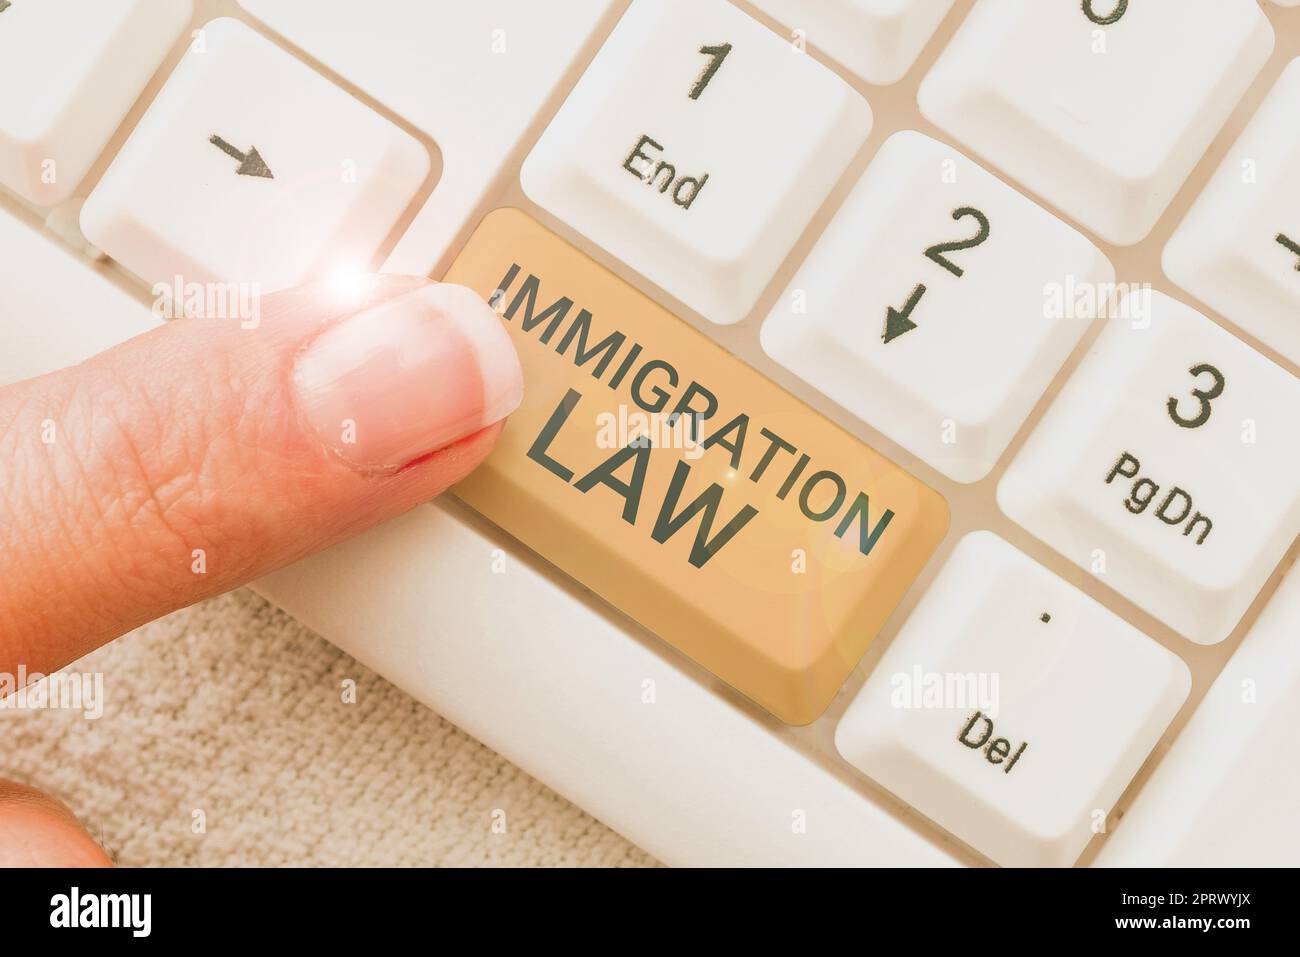 Handwriting text Immigration LawEmigration of a citizen shall be lawful in making of travel. Business concept Emigration of a citizen shall be lawful in making of travel Stock Photo